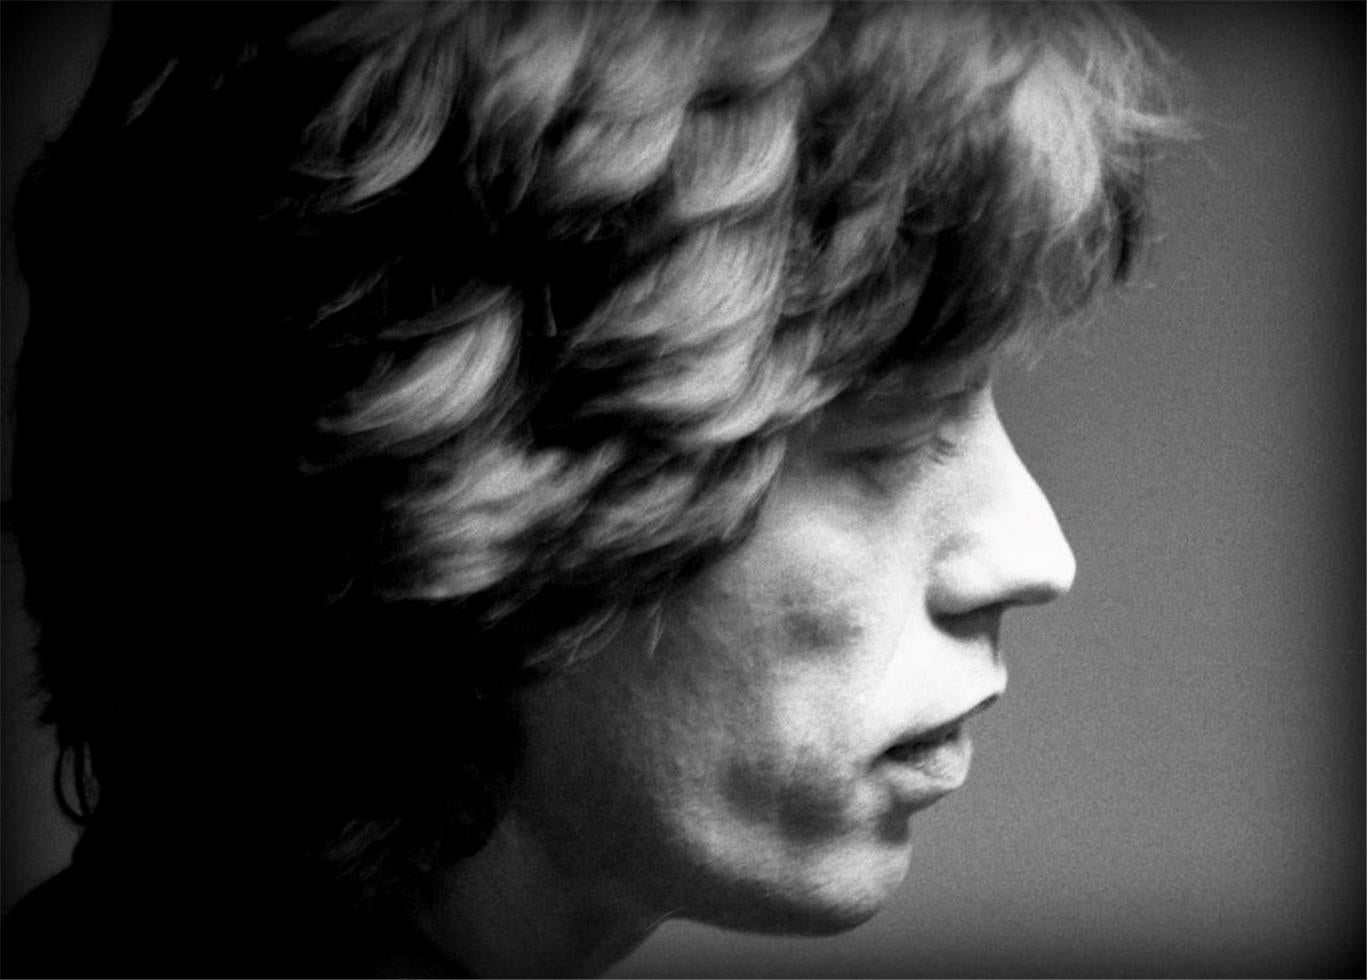 Black and White Photograph Peter Simon - Mick Jagger, Les Rolling Stones, 1978